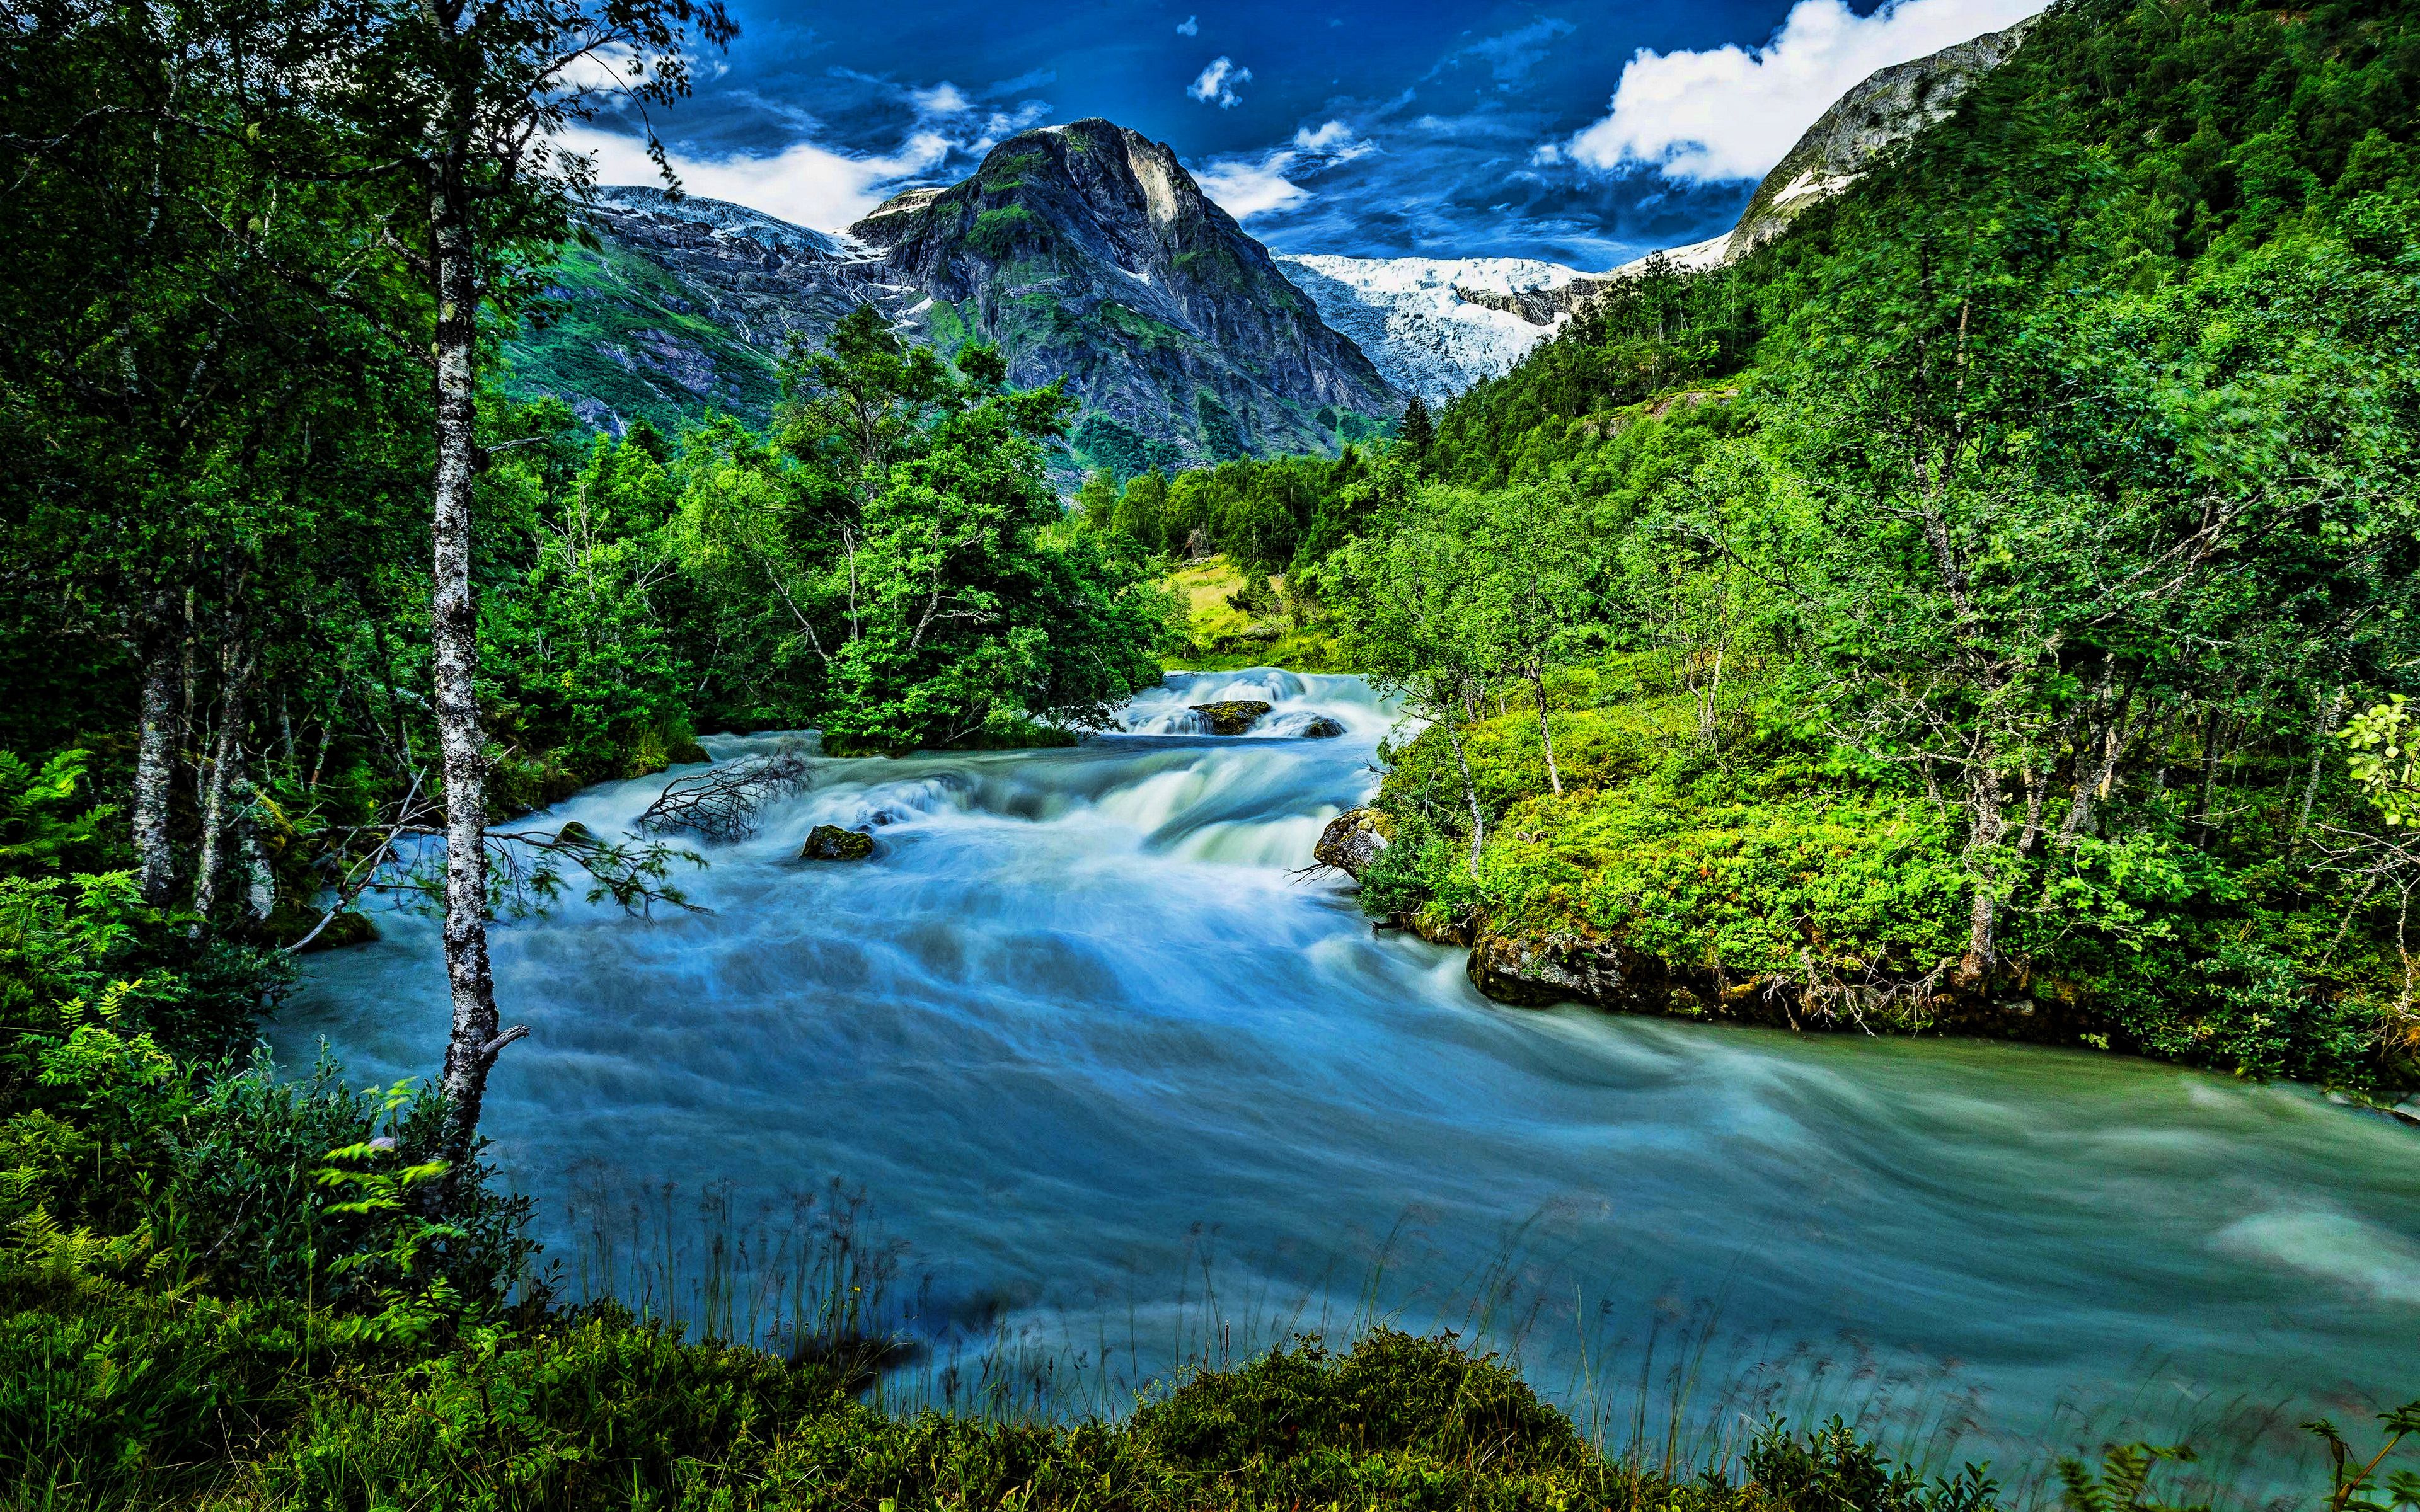 Download wallpaper Norway, beautiful nature, HDR, mountain river, forest, mountains, summer, Europe, norwegian nature for desktop with resolution 3840x2400. High Quality HD picture wallpaper